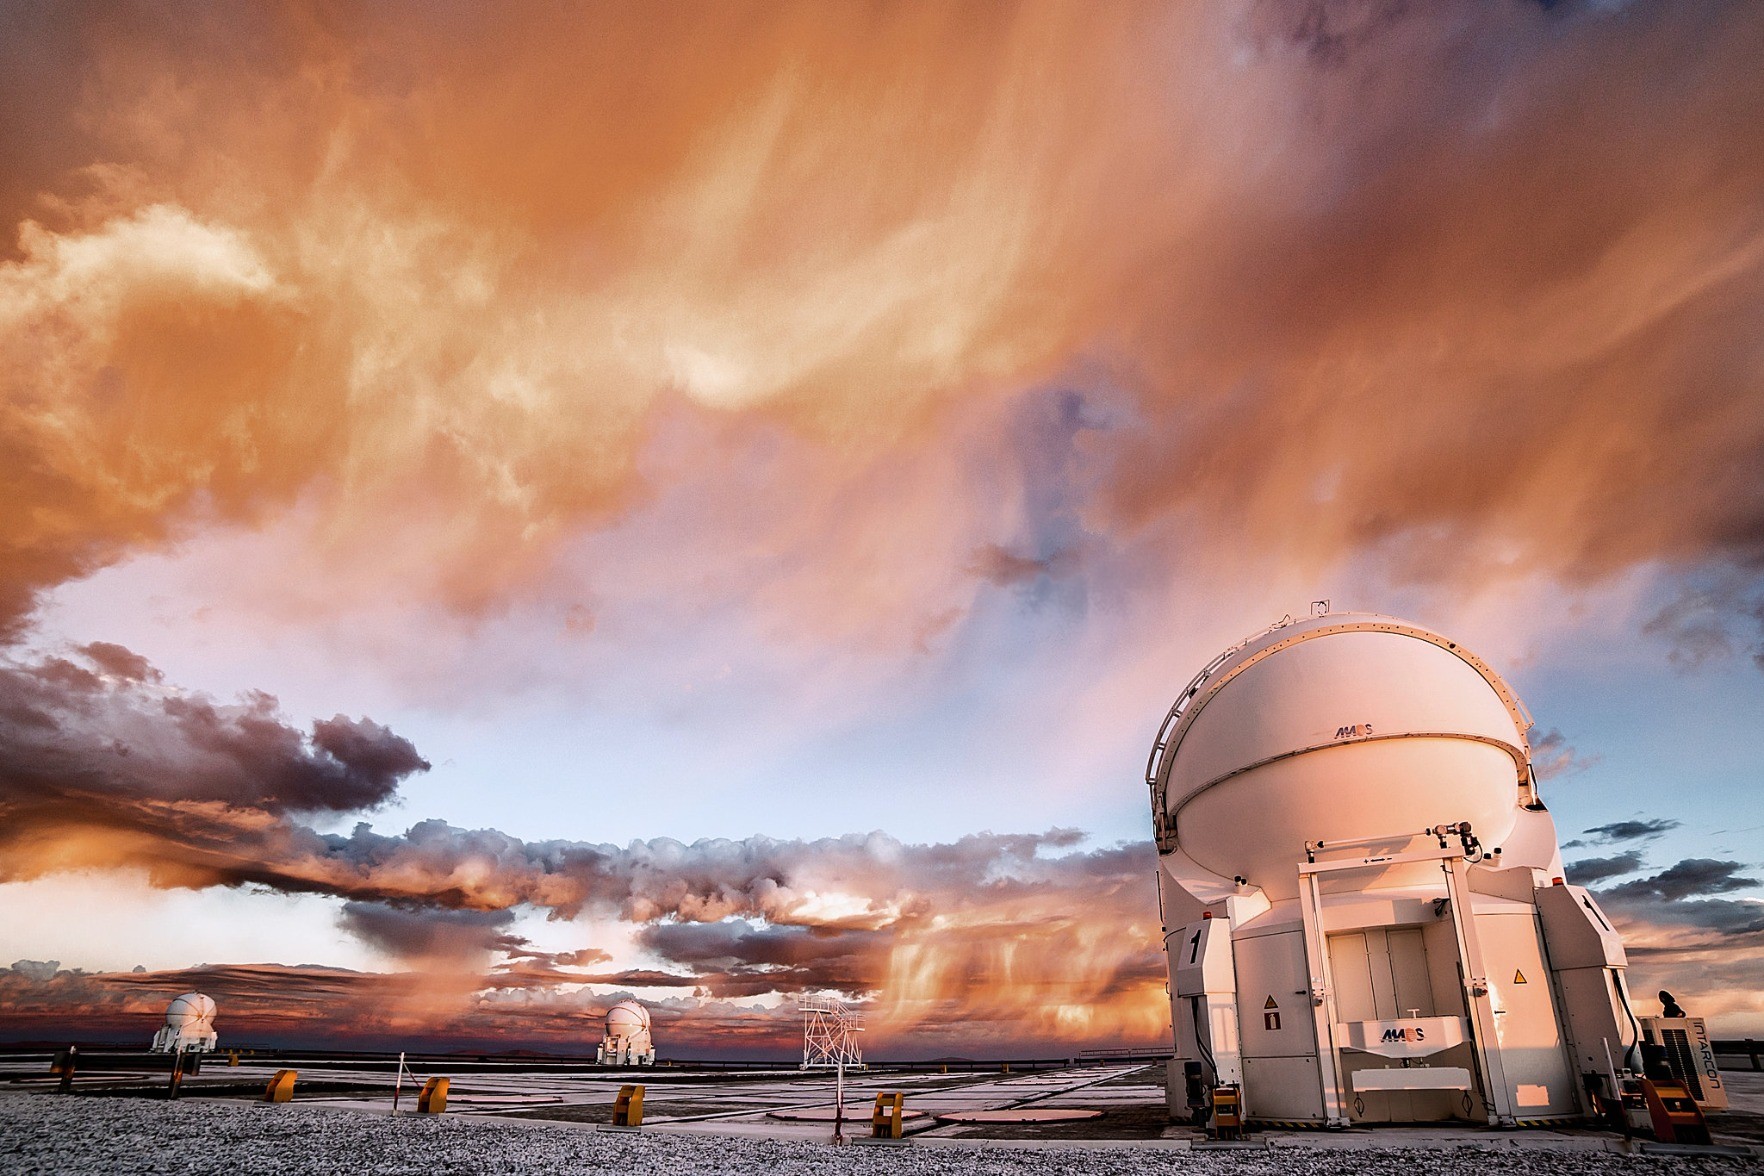 A stormy sunset over ESO's Paranal Observatory. There are three identical white telescope domes, one to the lower-right in the foreground and two to the background at the center left. The sky is blue, with several dark clouds. There are wispy veils of rain that don't quite touch the ground. These veils as well as the telescopes are bathed in the golden sunset light coming from the right (the Sun itself isn't visible in this image).